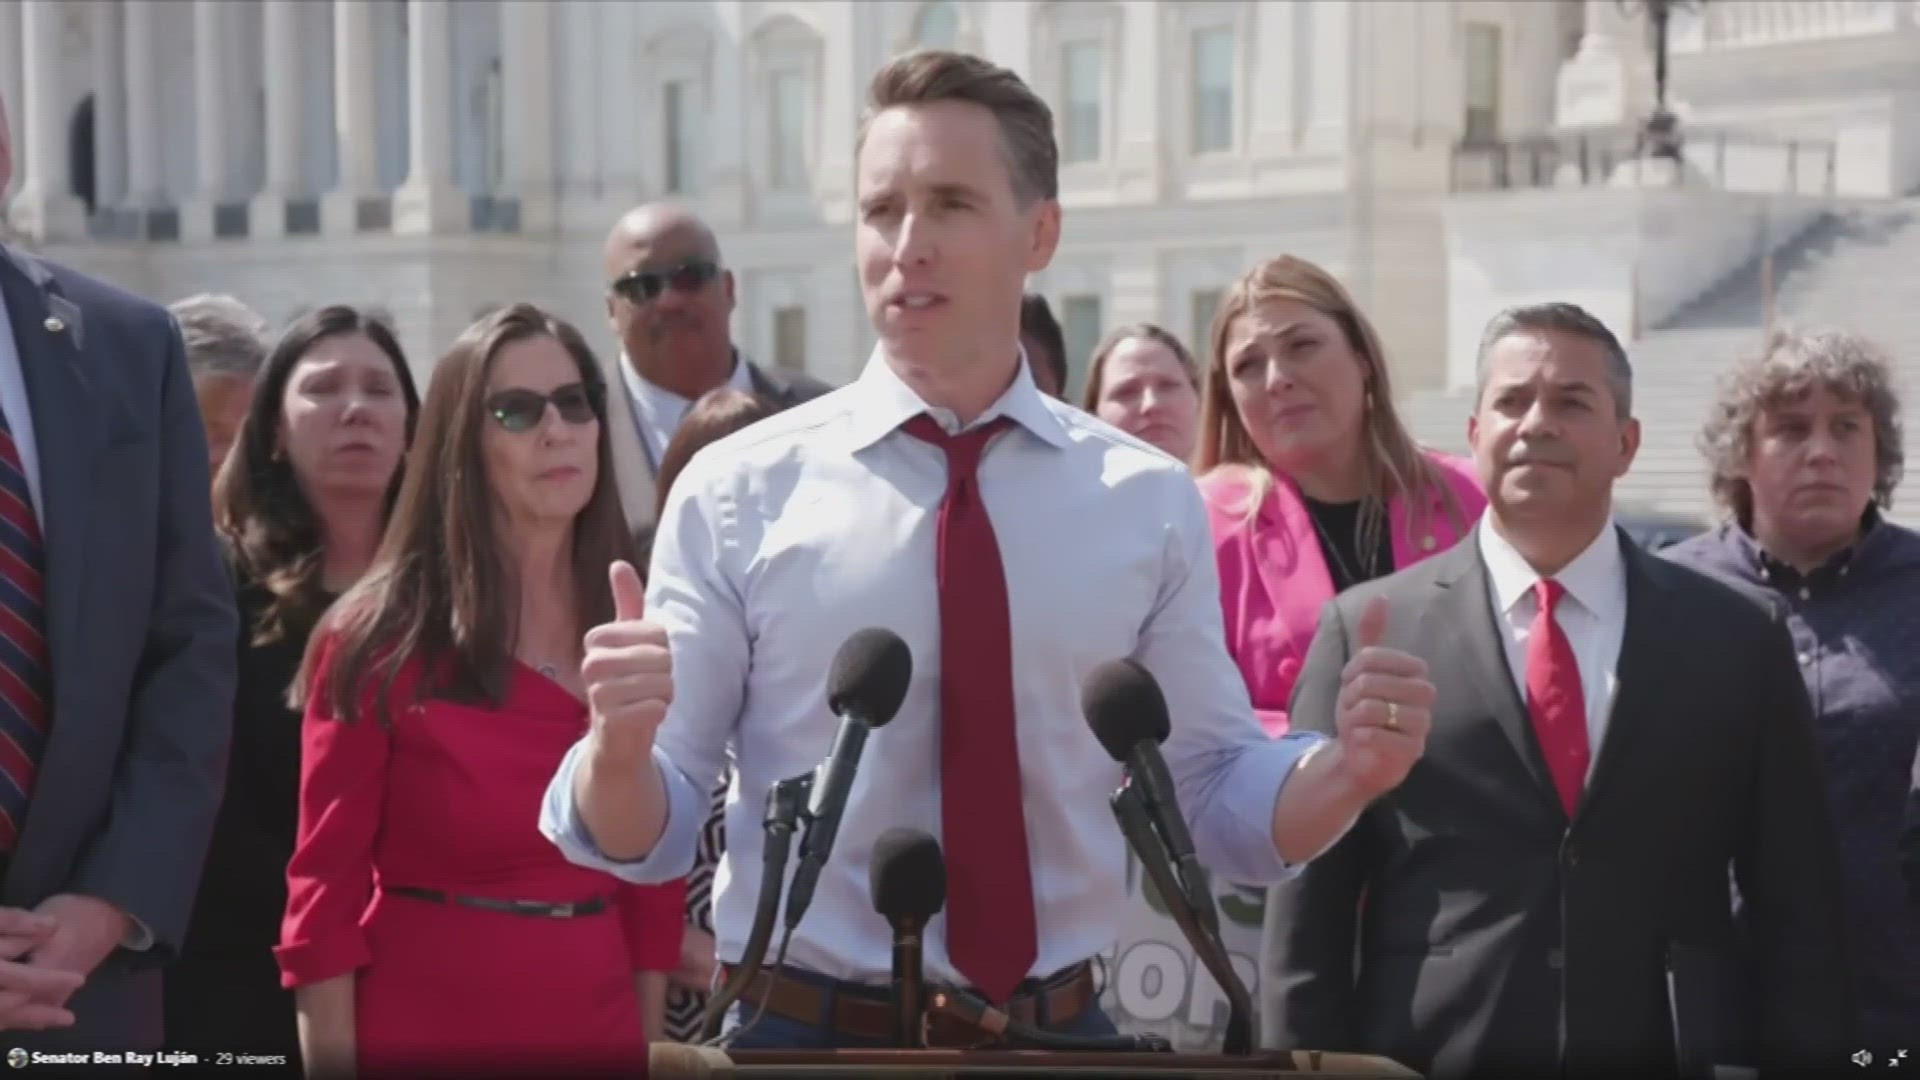 Missouri Sen. Josh Hawley demanded justice for those affected by contaminated waste. He held a Wednesday news conference.